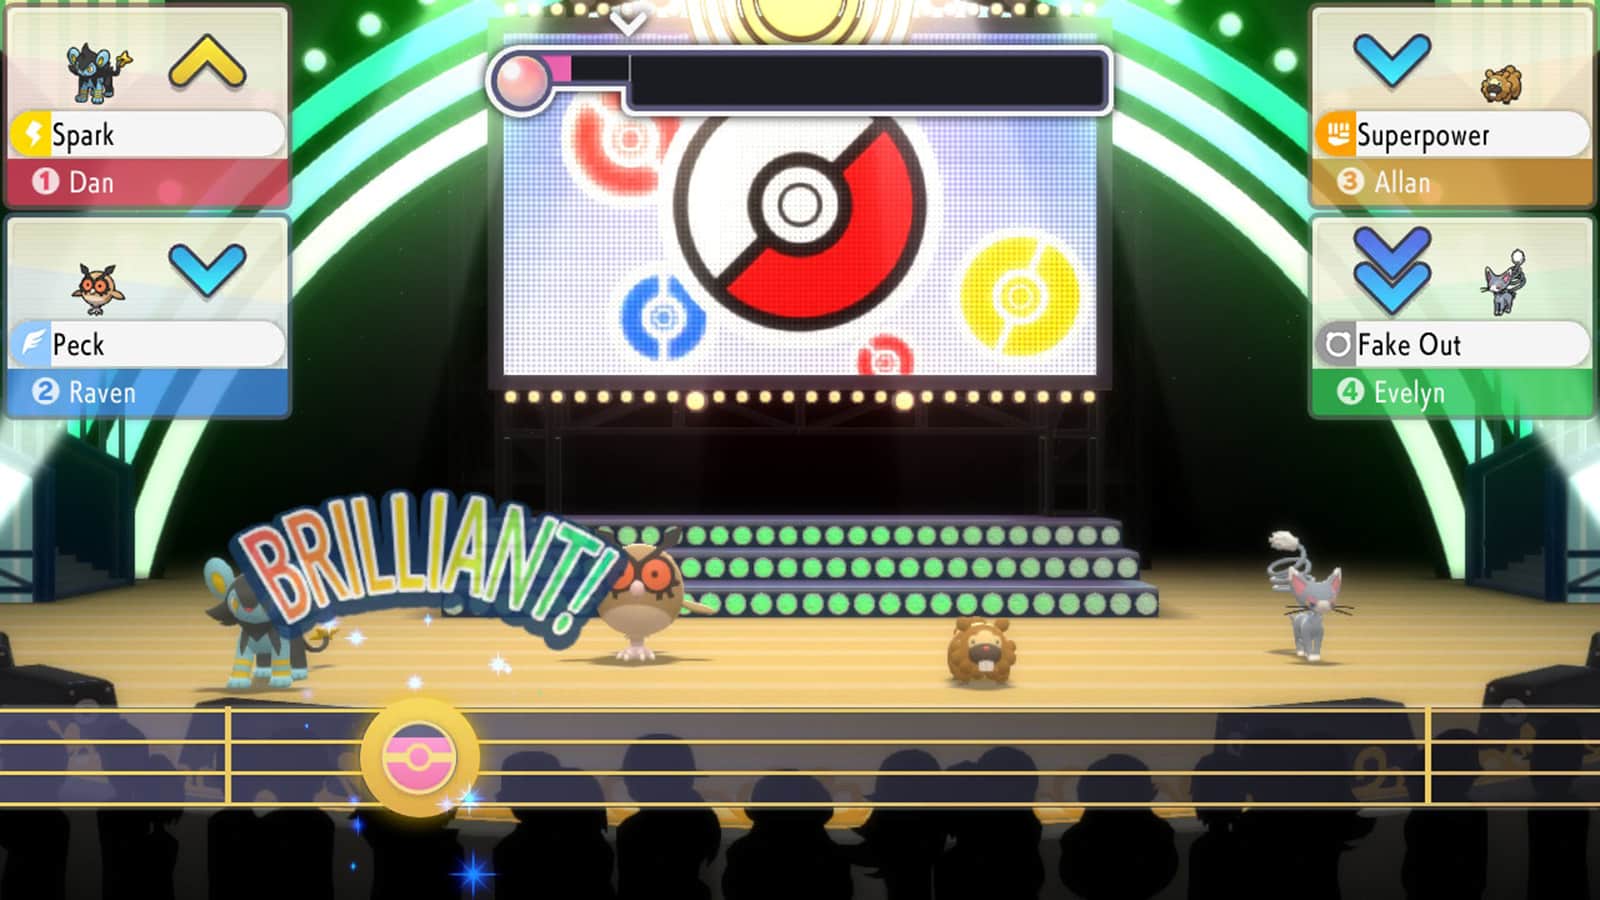 A Super Contest taking place in Pokemon